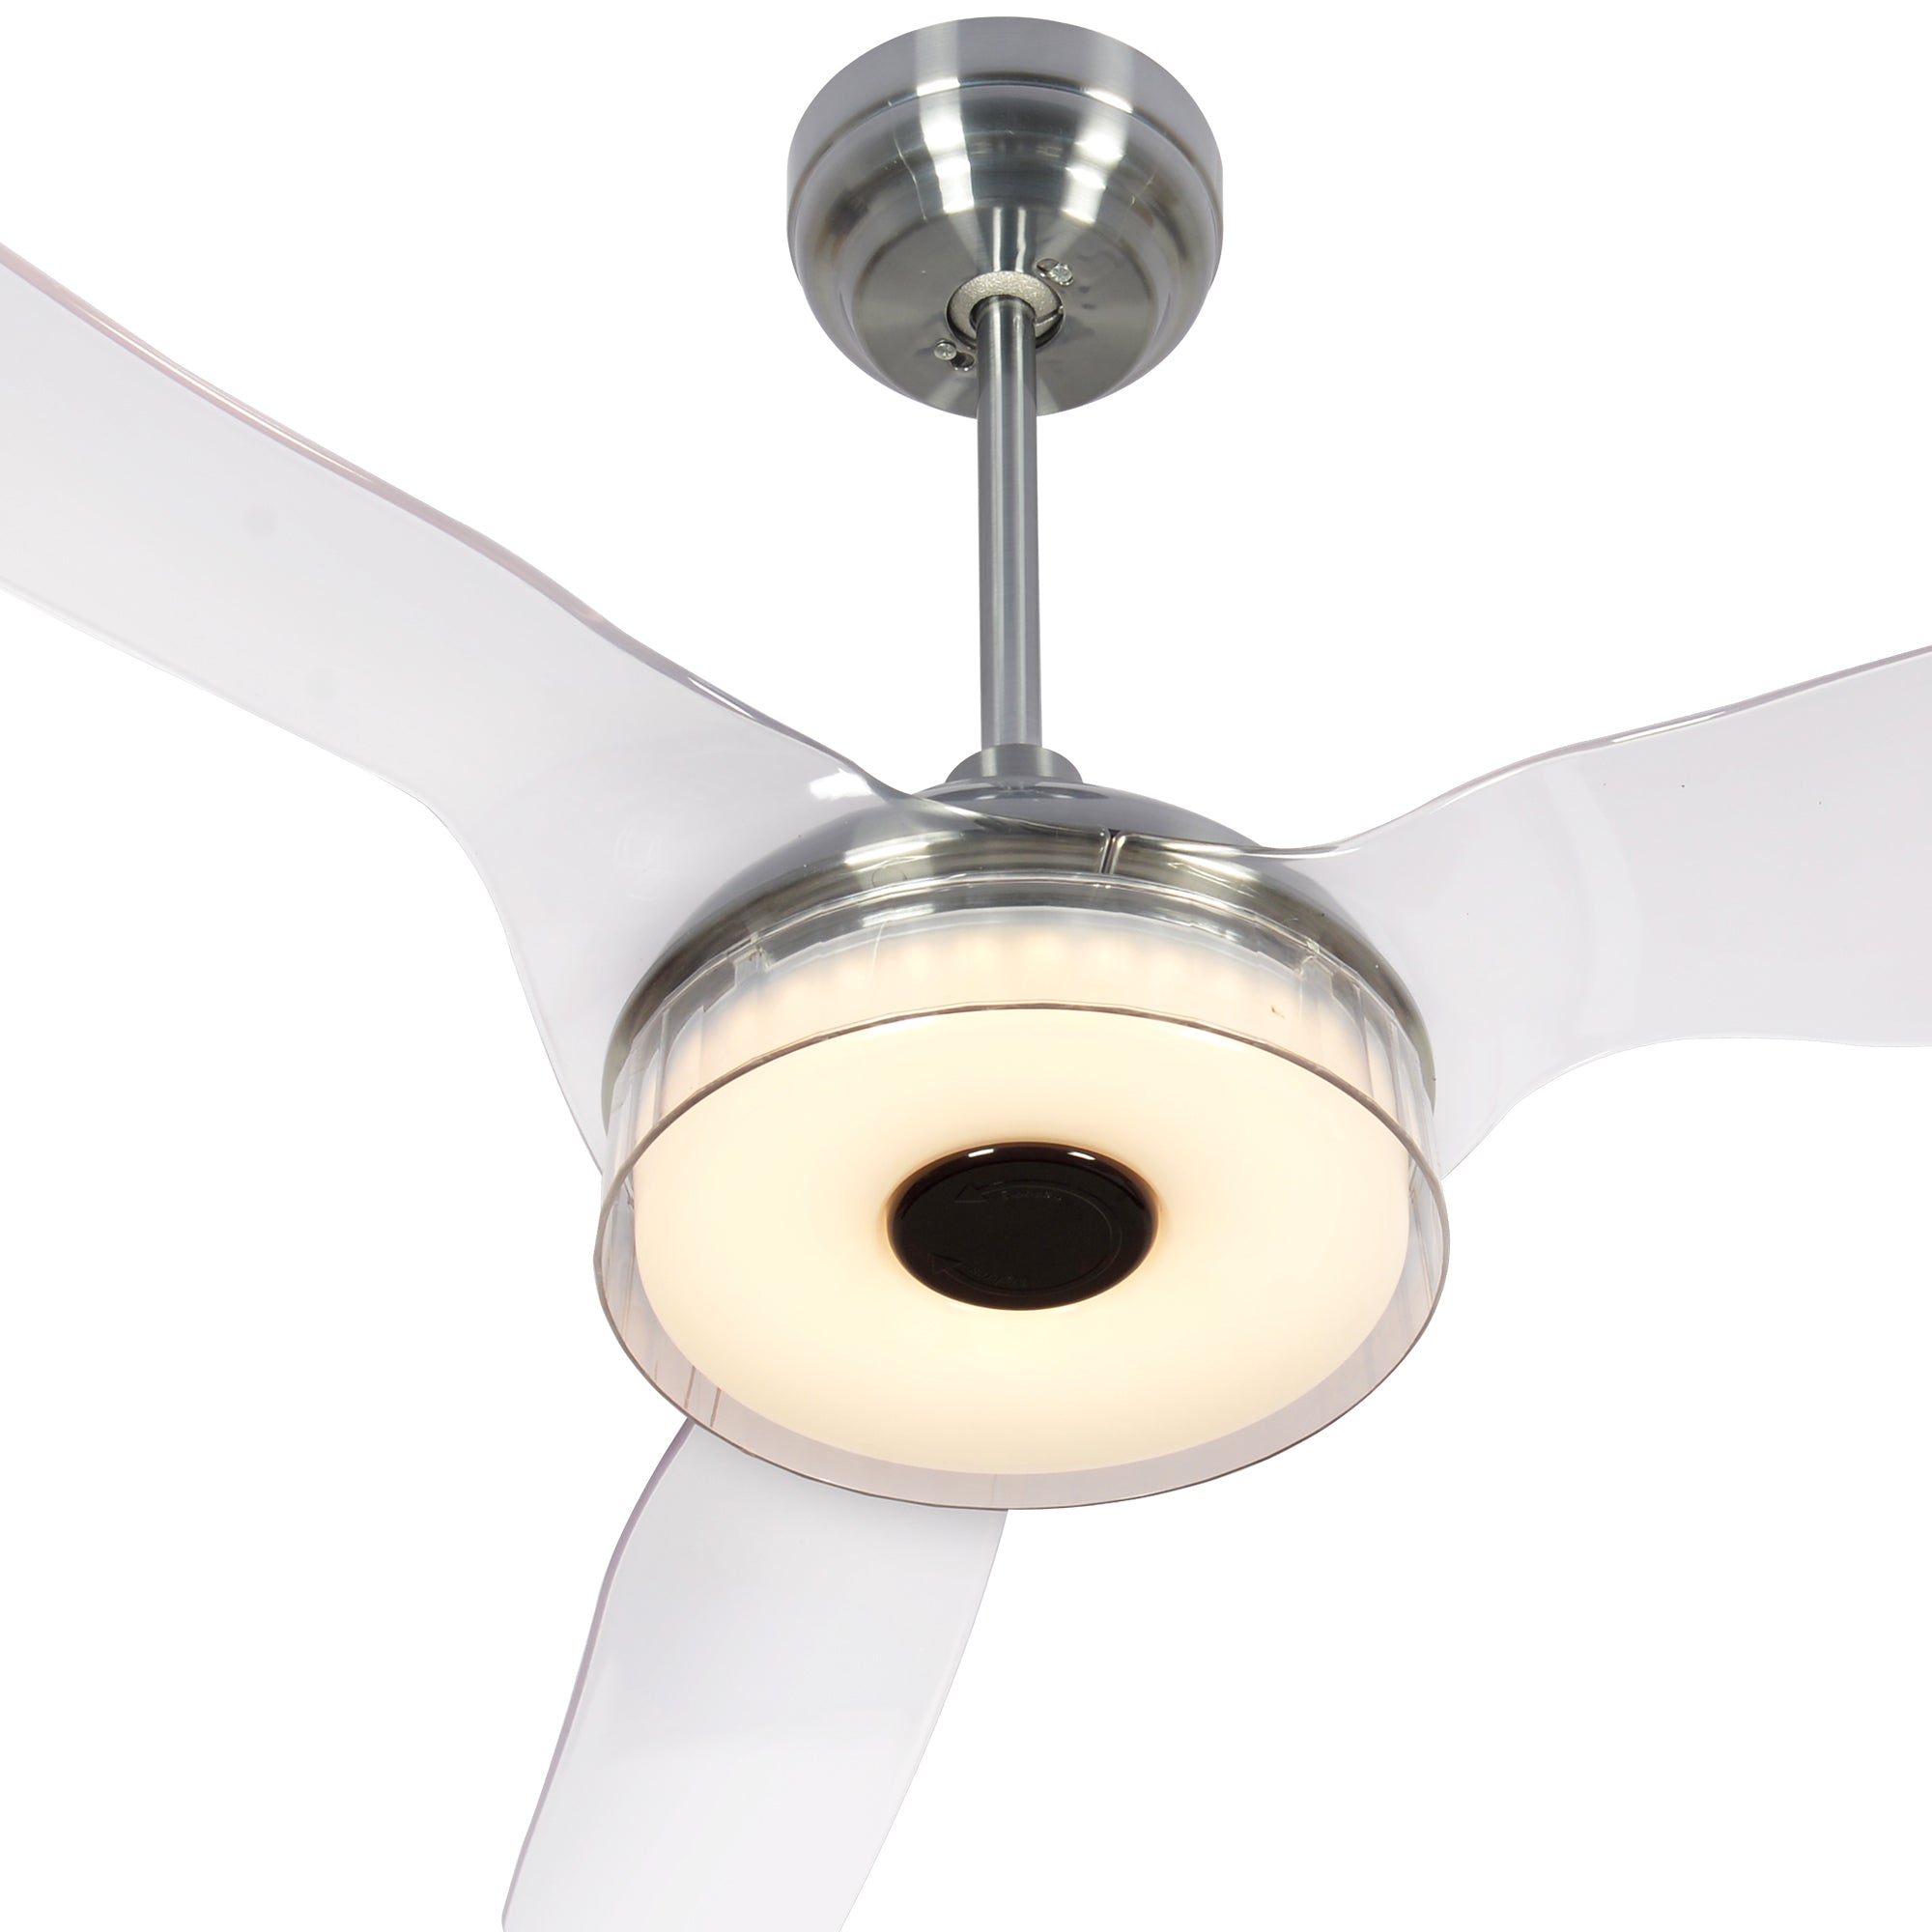 Icebreaker 52'' 3-Blade Smart Ceiling Fan with LED Light Kit & Remote - Silver/Clear#color_Silver